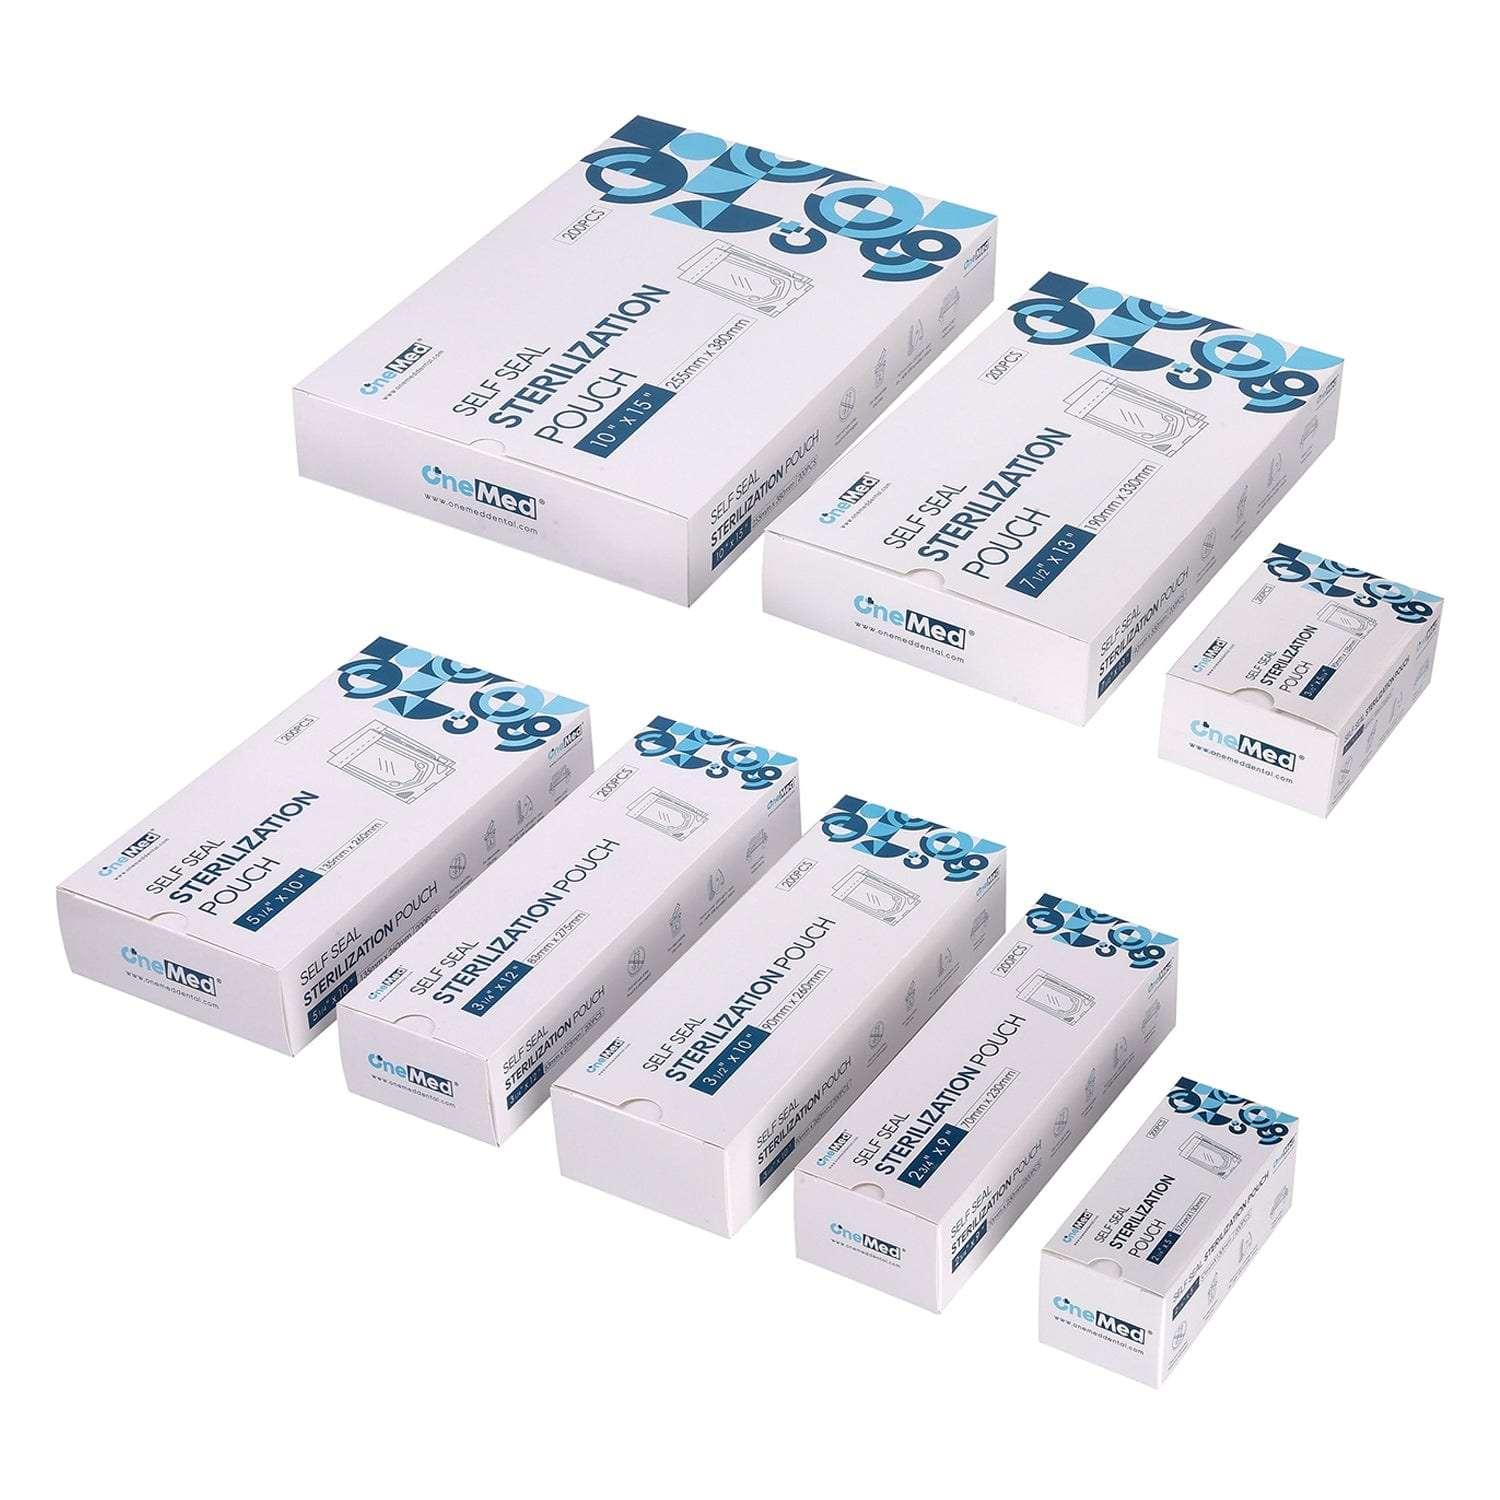 OneMed Dental Self-Sealing Sterilization Pouches 7.5x13 inch 200/Box - OneMed Dental